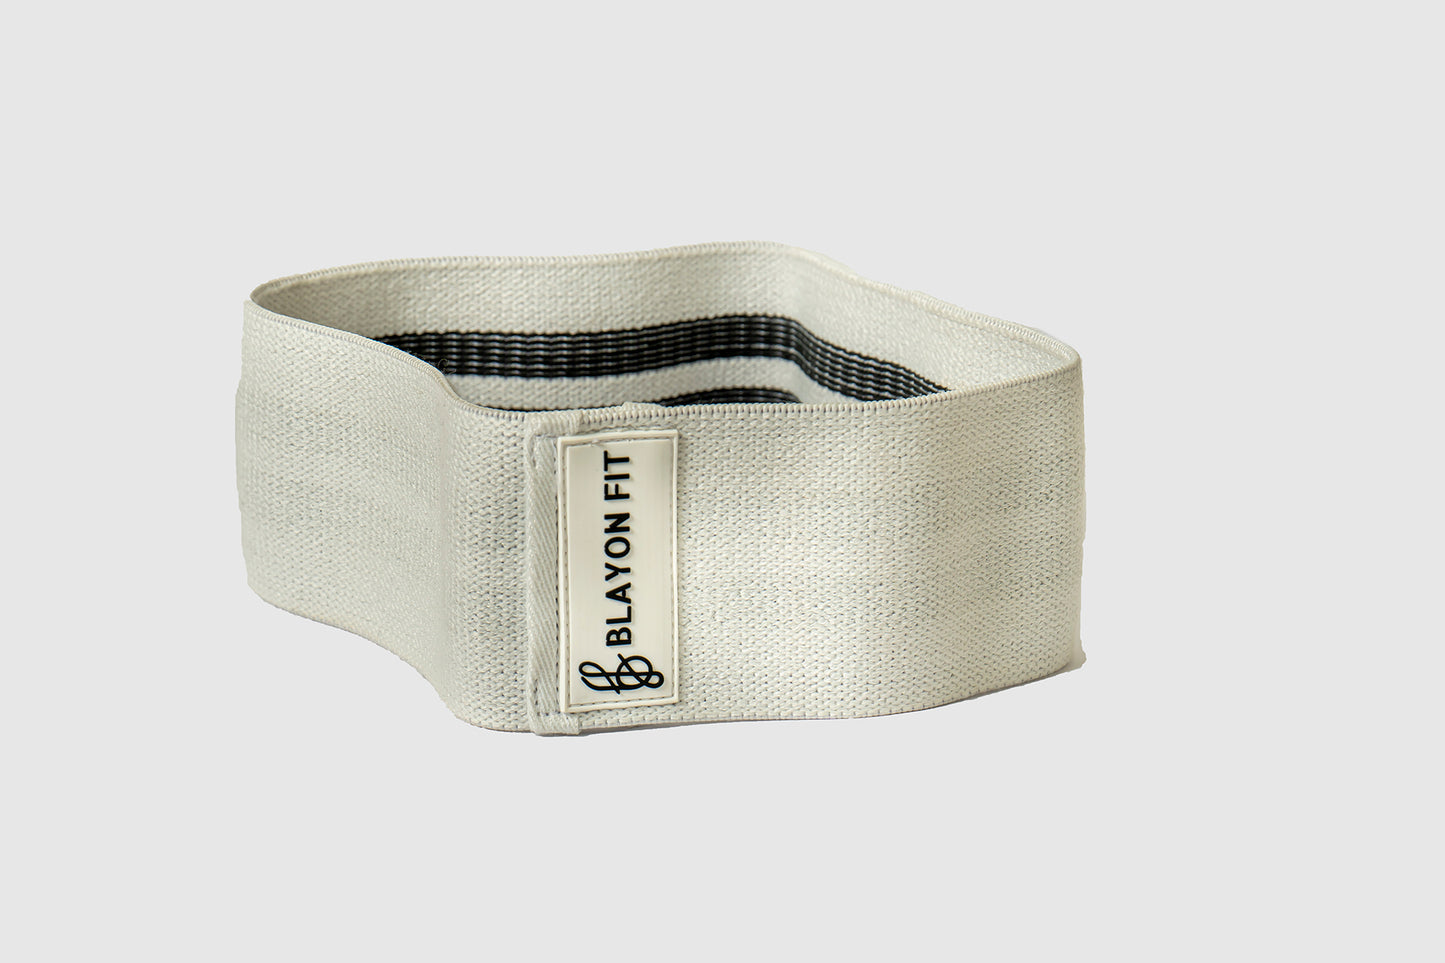 high quality fabric resistant bands are essential for a home workout to target all your muscles